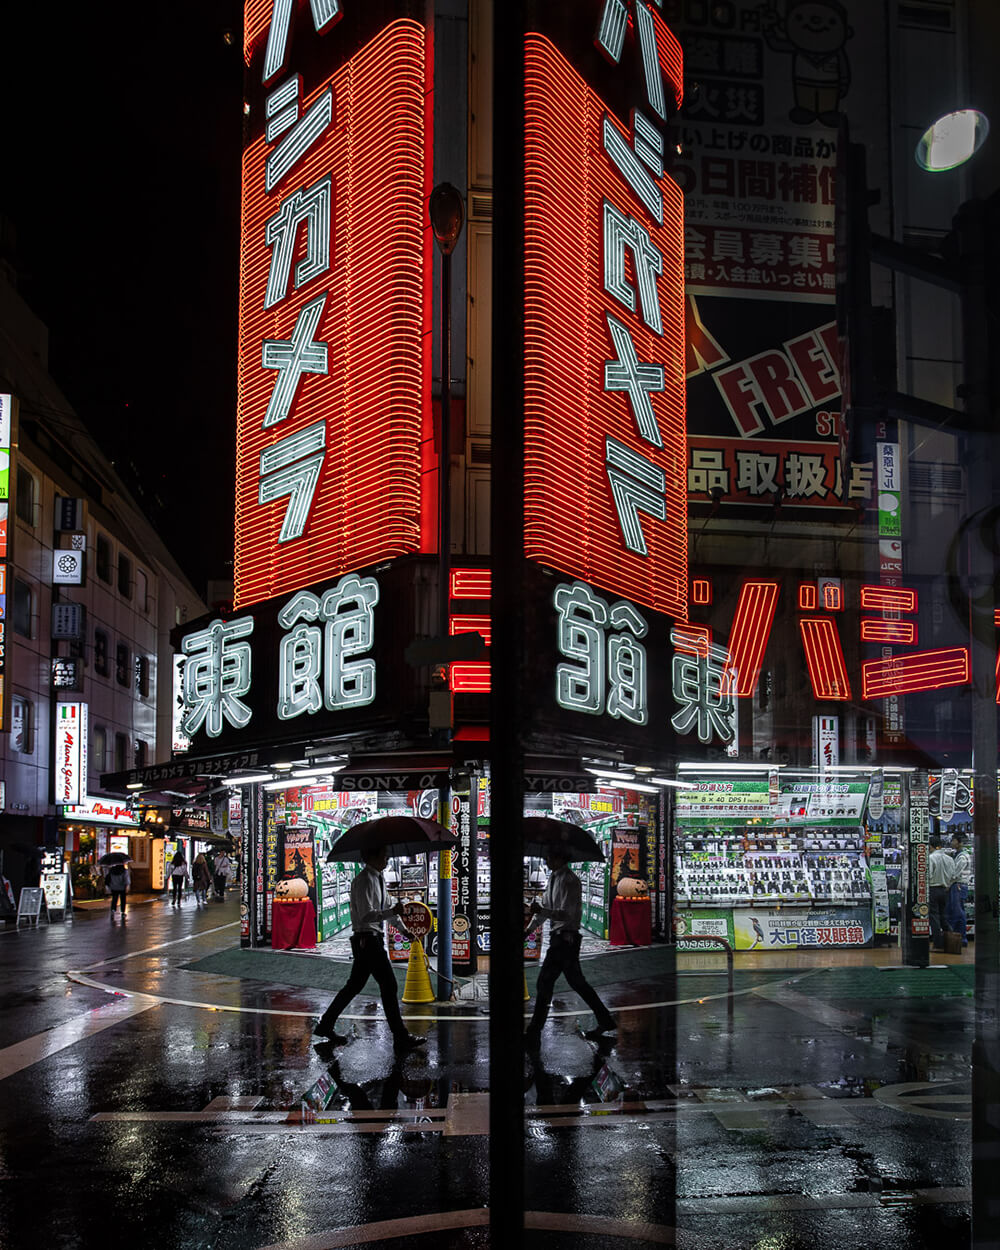 Image of neon signs at night by Julian Lallo